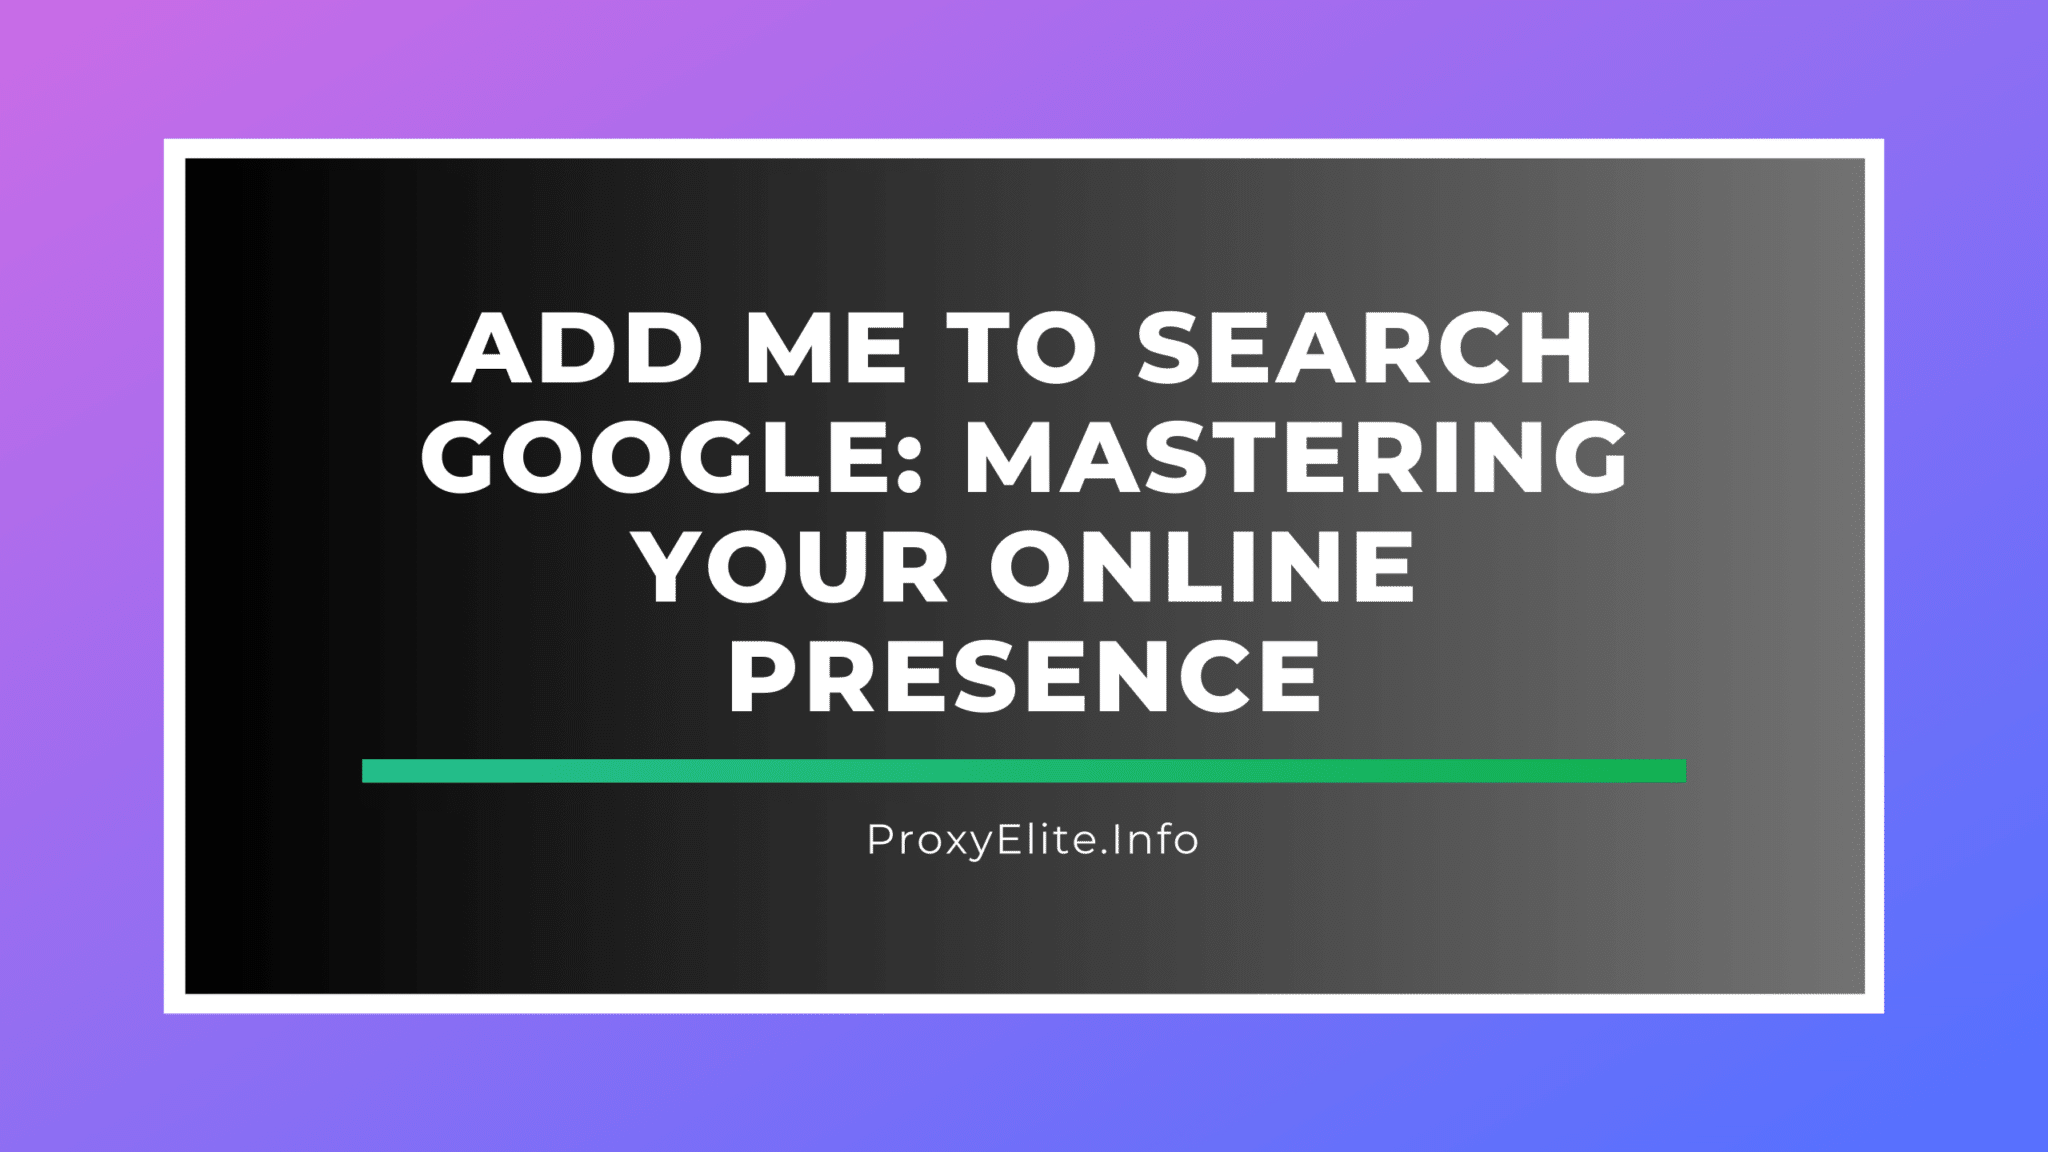 Add Me To Search Google: Mastering Your Online Presence